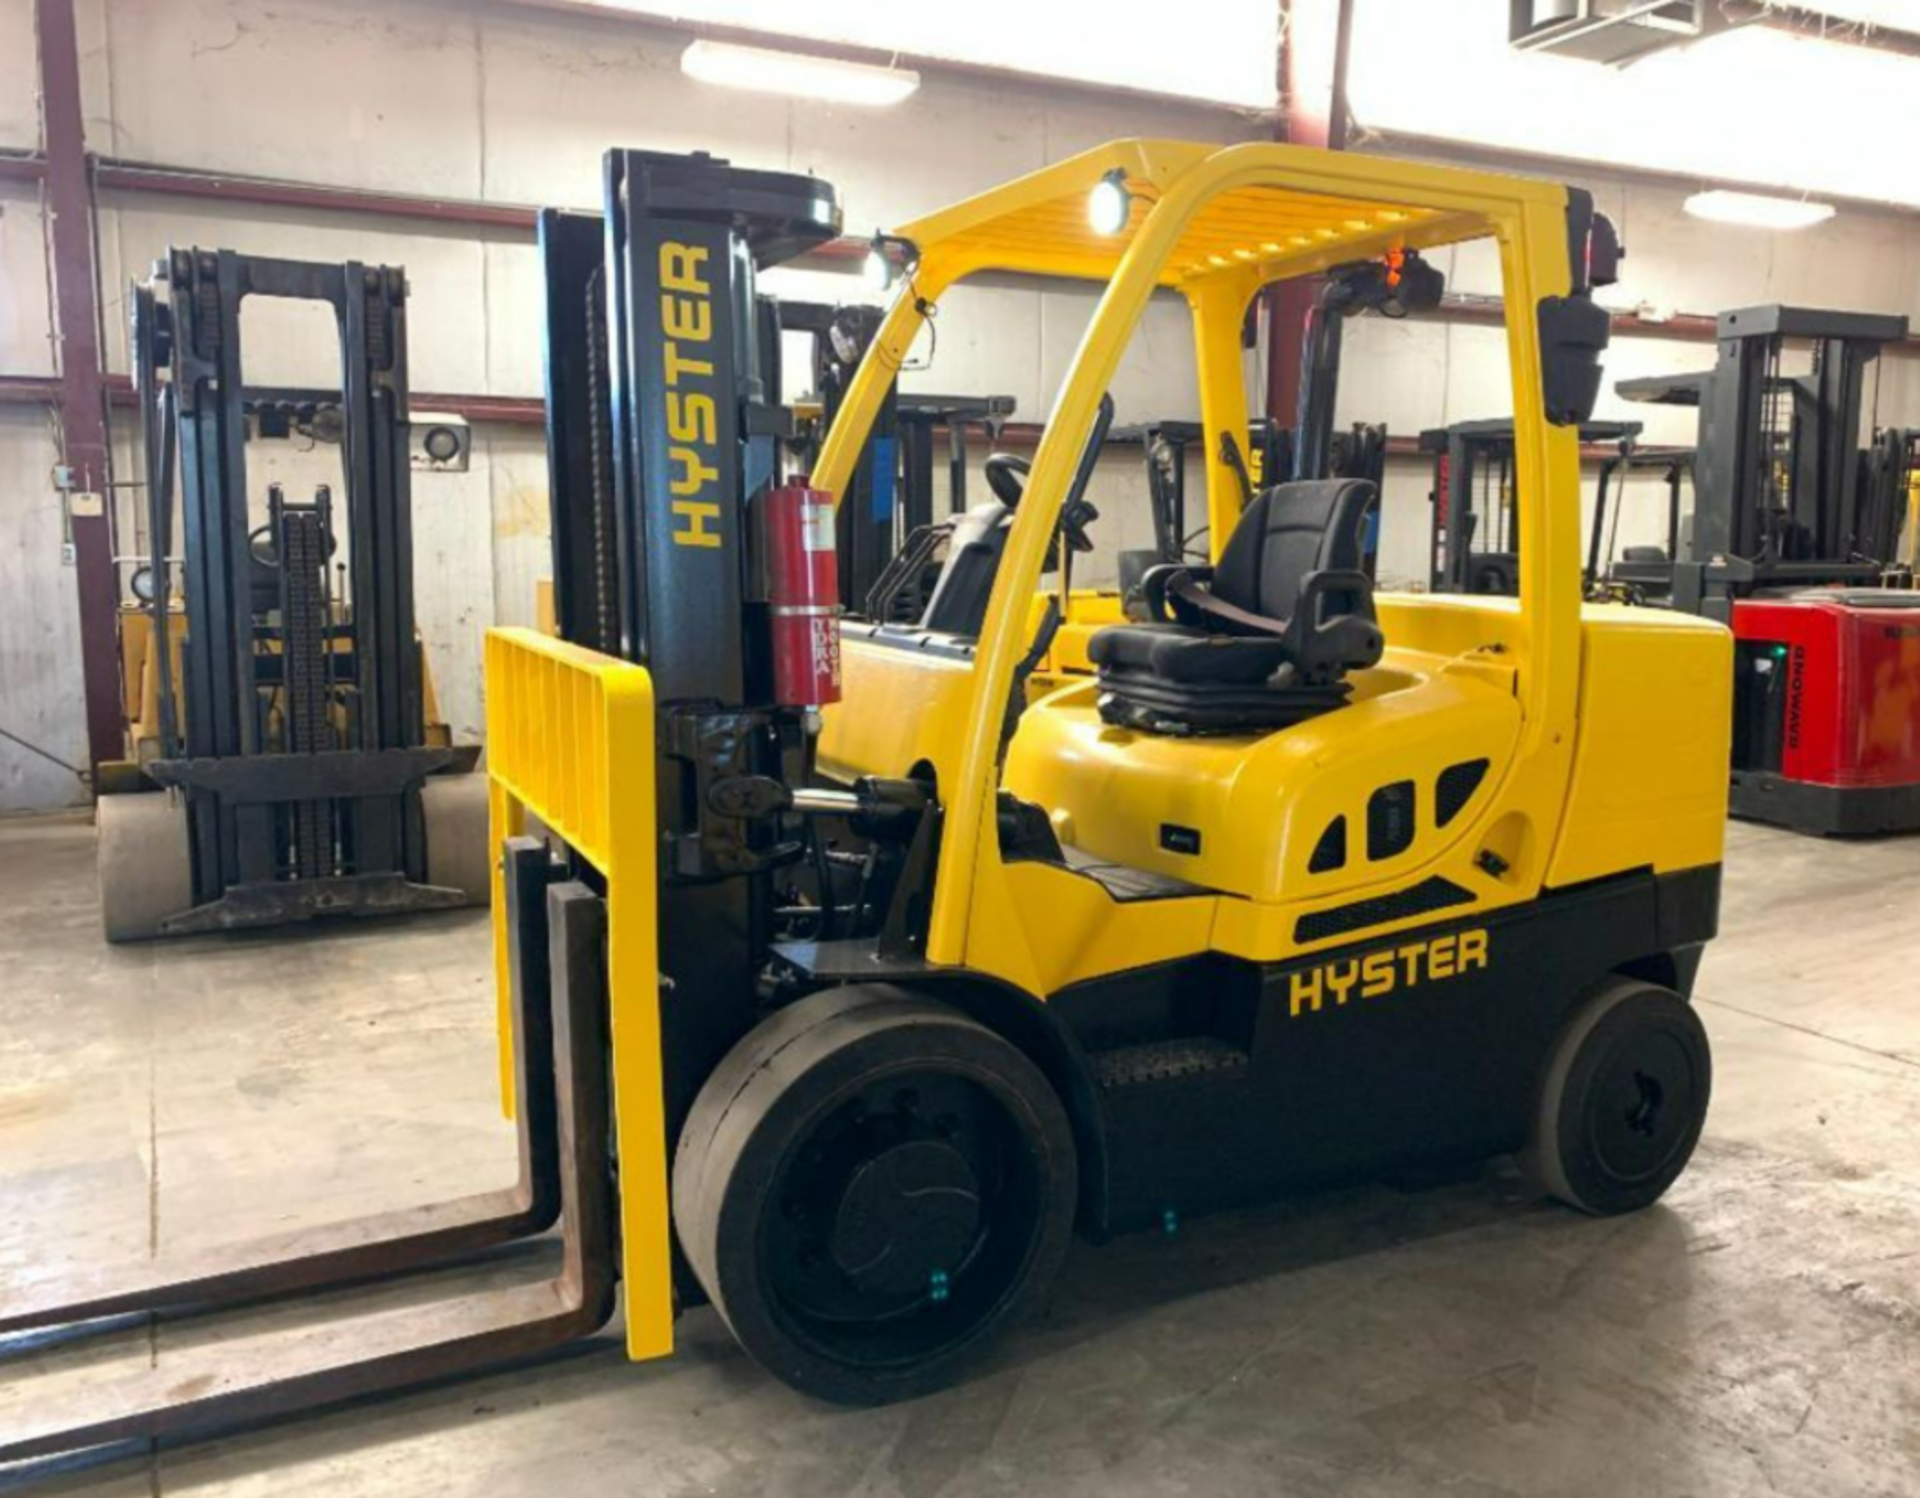 FREE CUSTOMS - 2017 Hyster 15,500lbs Capacity Forklift S155FT Diesel Unit MINT